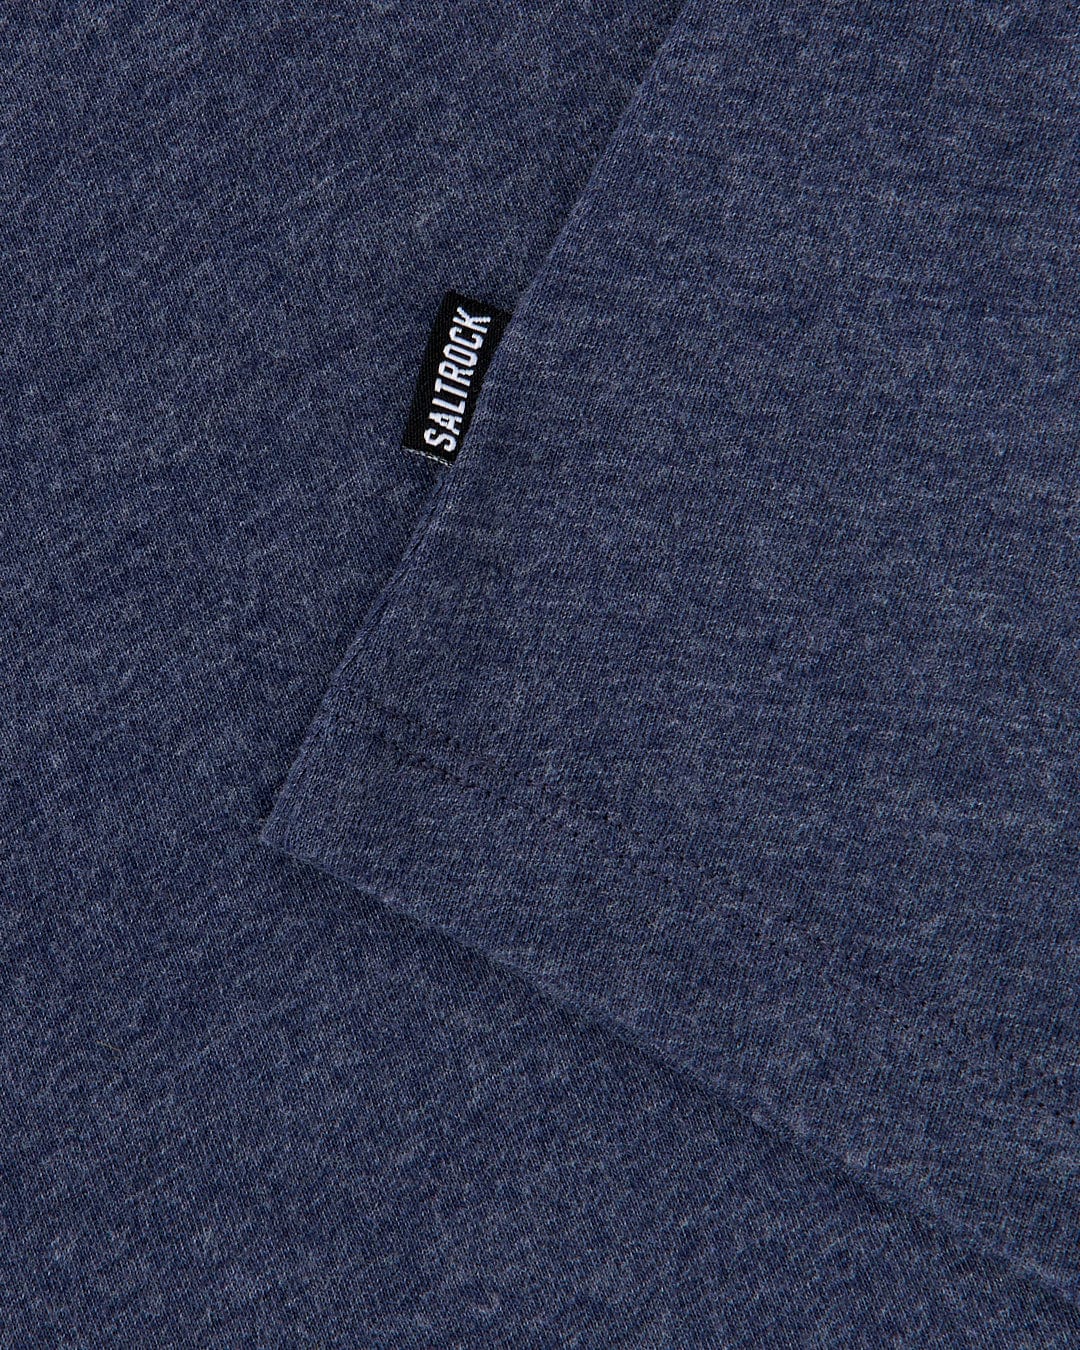 A close up of a Velator - Womens Short Sleeve T-Shirt - Blue Marl with Saltrock branding on the chest.